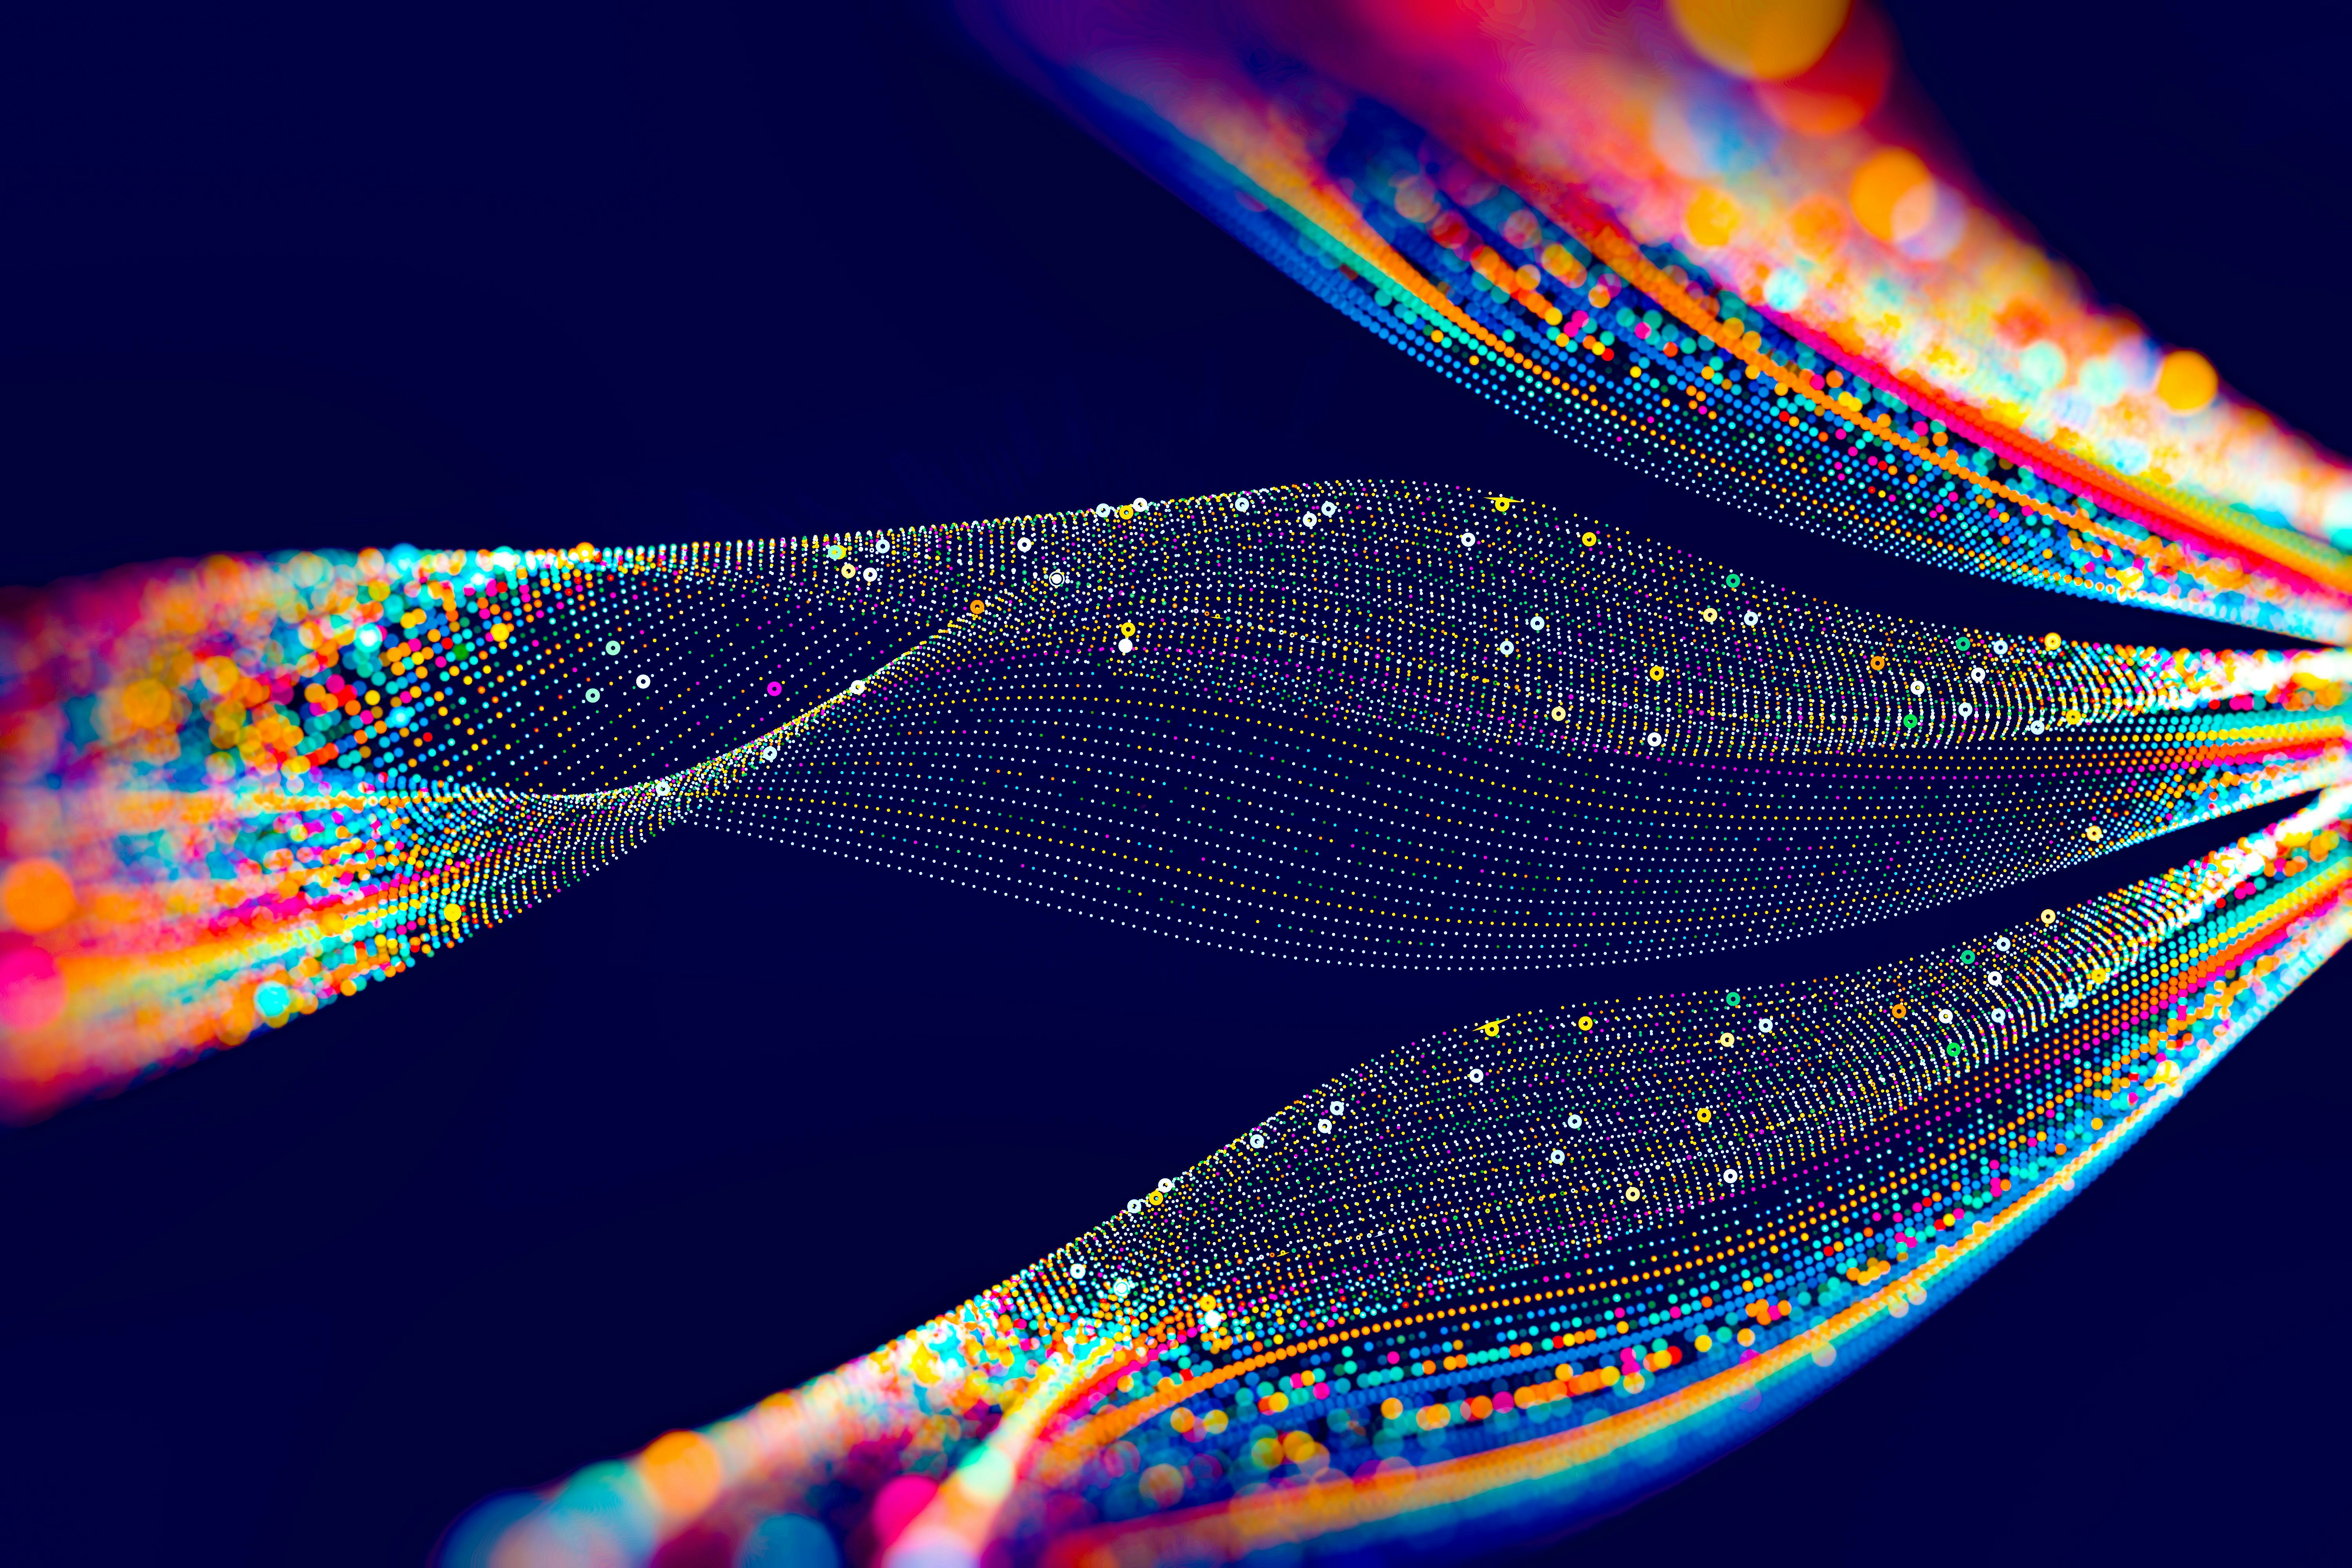 Energy Technology Perspectives 2023 cover photo of multicolored swirls on a navy background